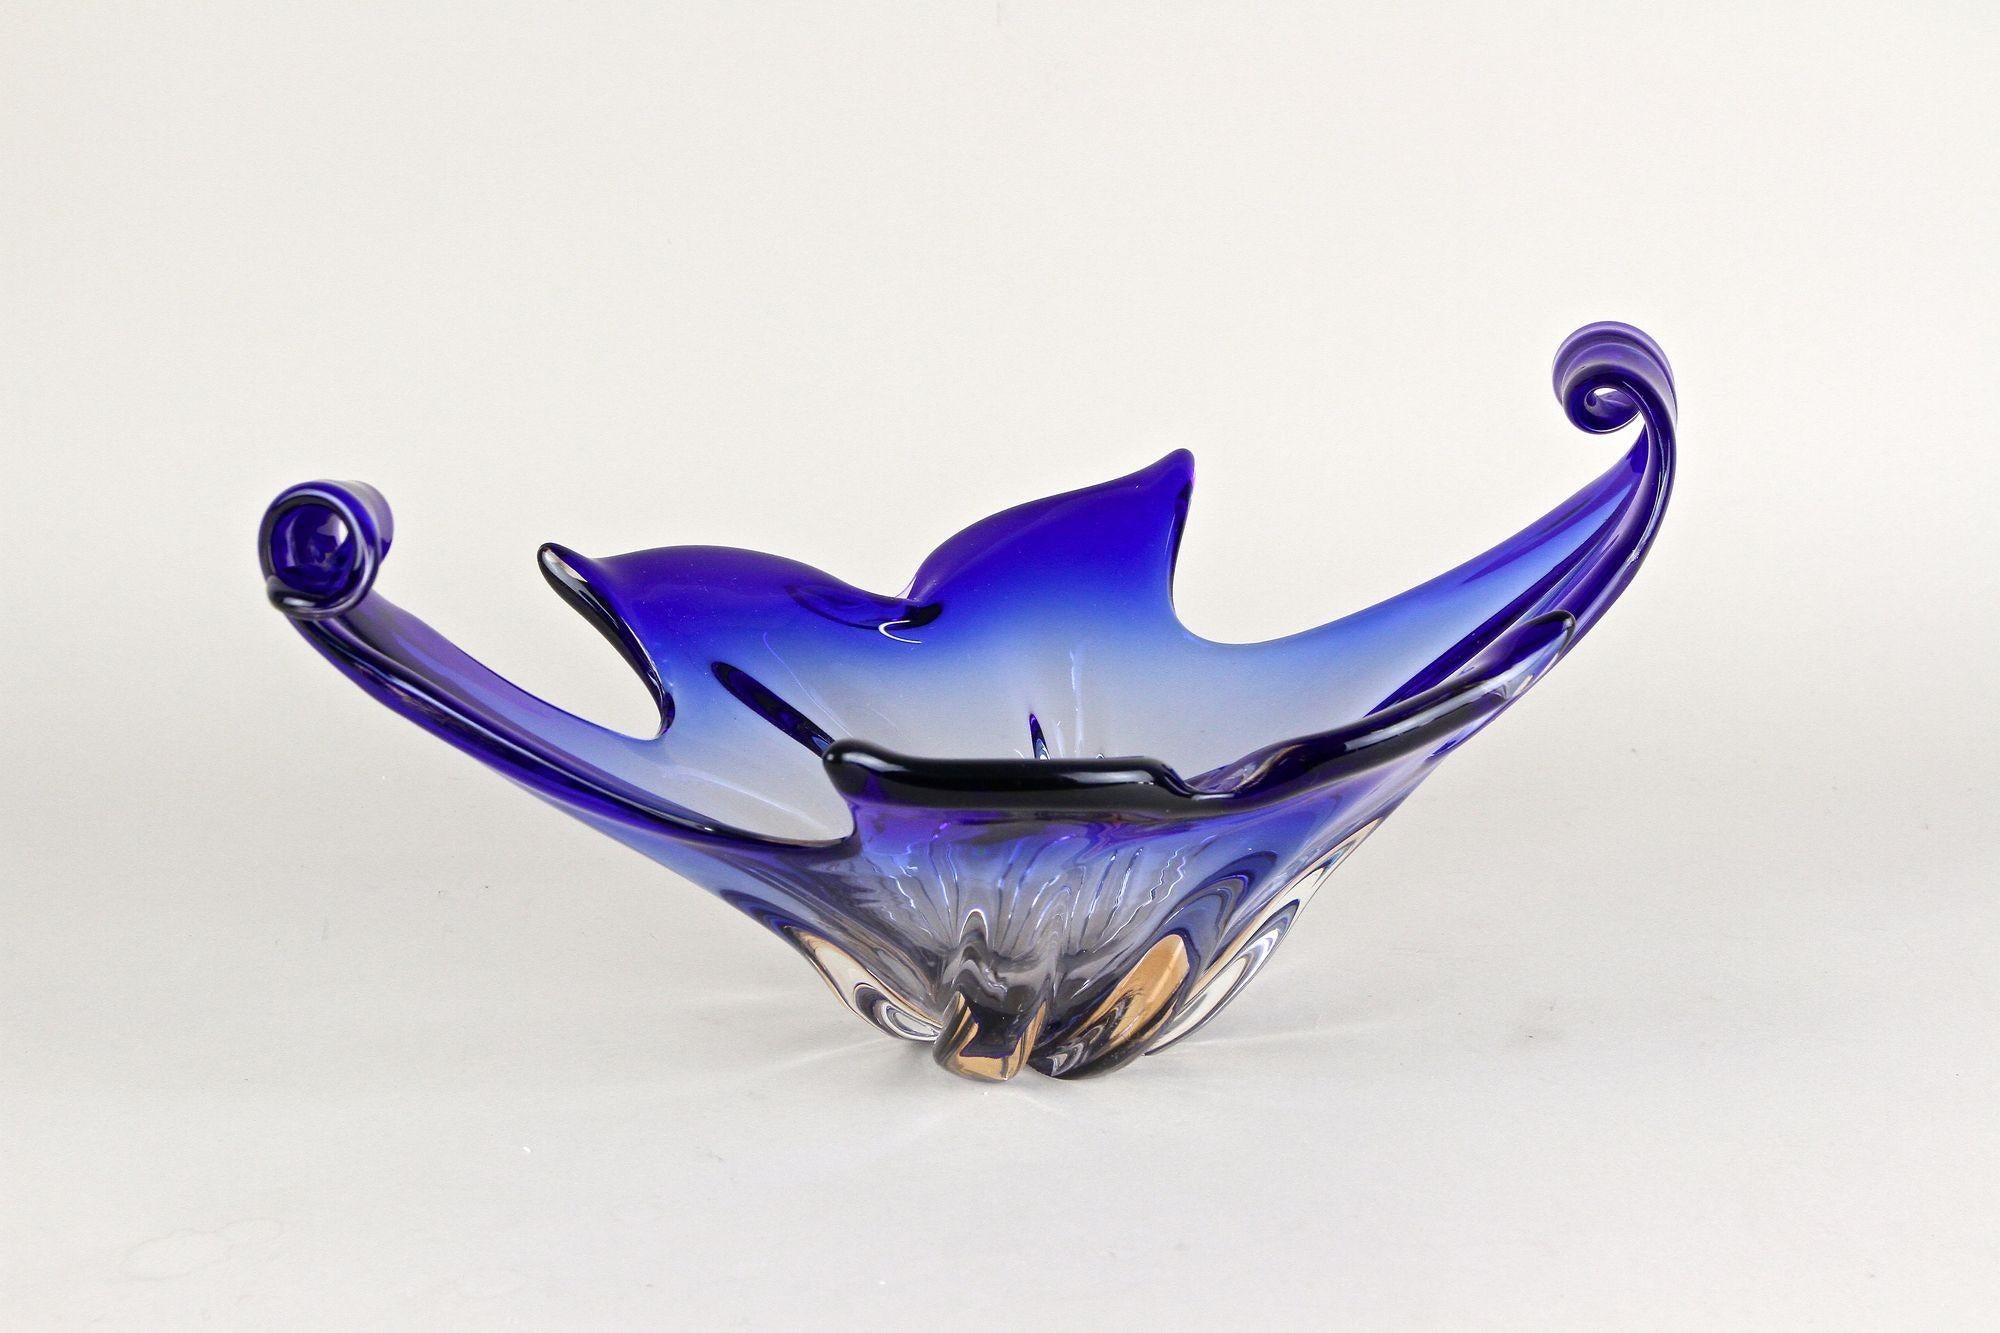 Blue Murano Glass Bowl - Mid-Century Modern, Italy circa 1960/70 For Sale 3